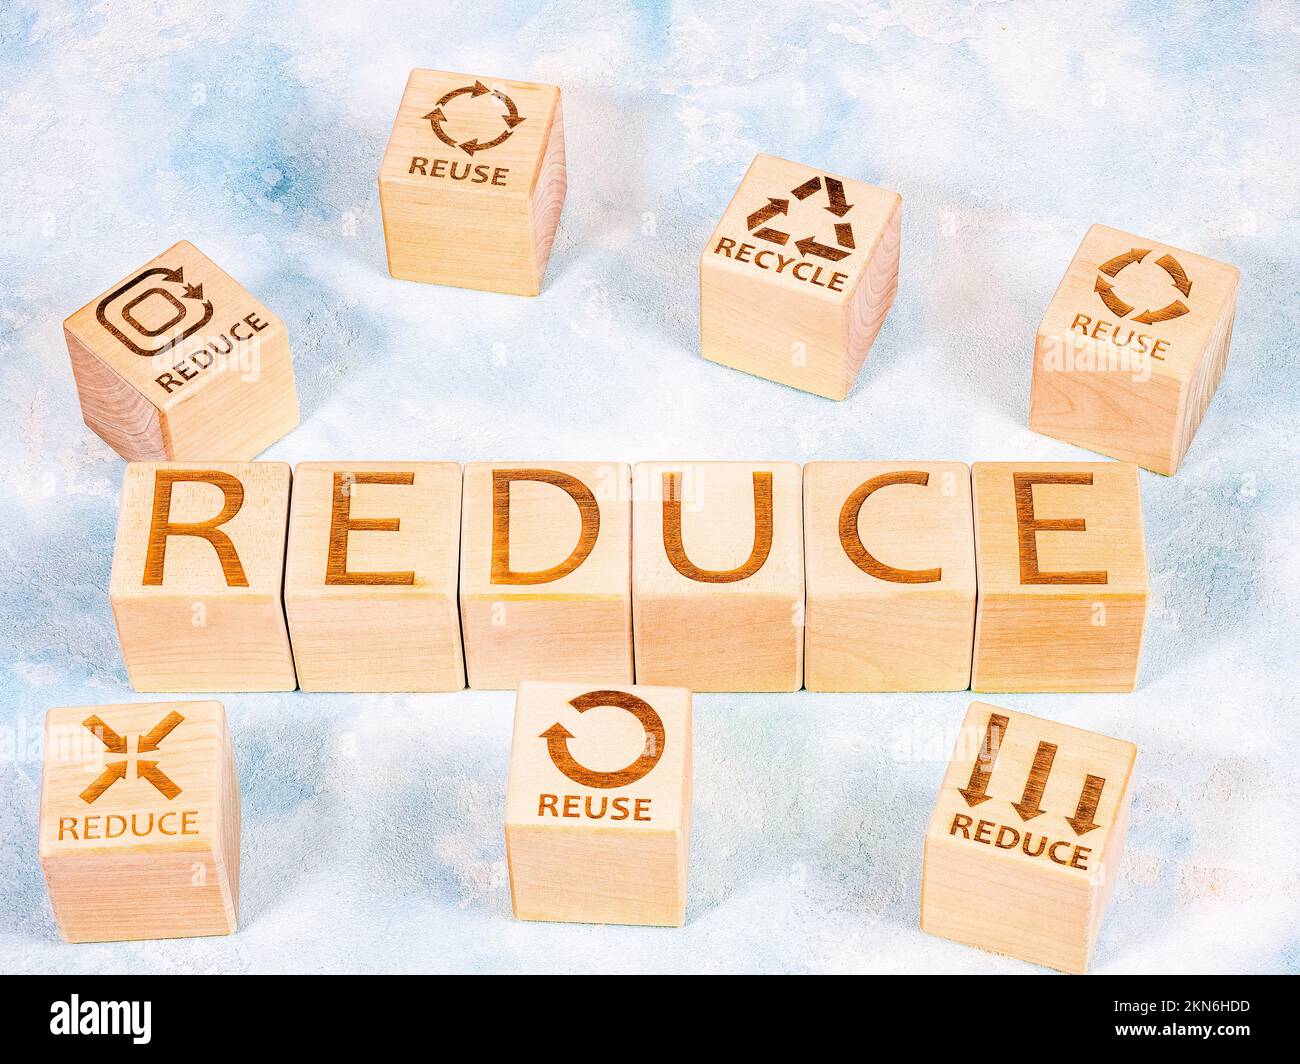 REDUCE, REUSE and RECYCLE symbols as a concept of resource saving and environmental protection Stock Photo